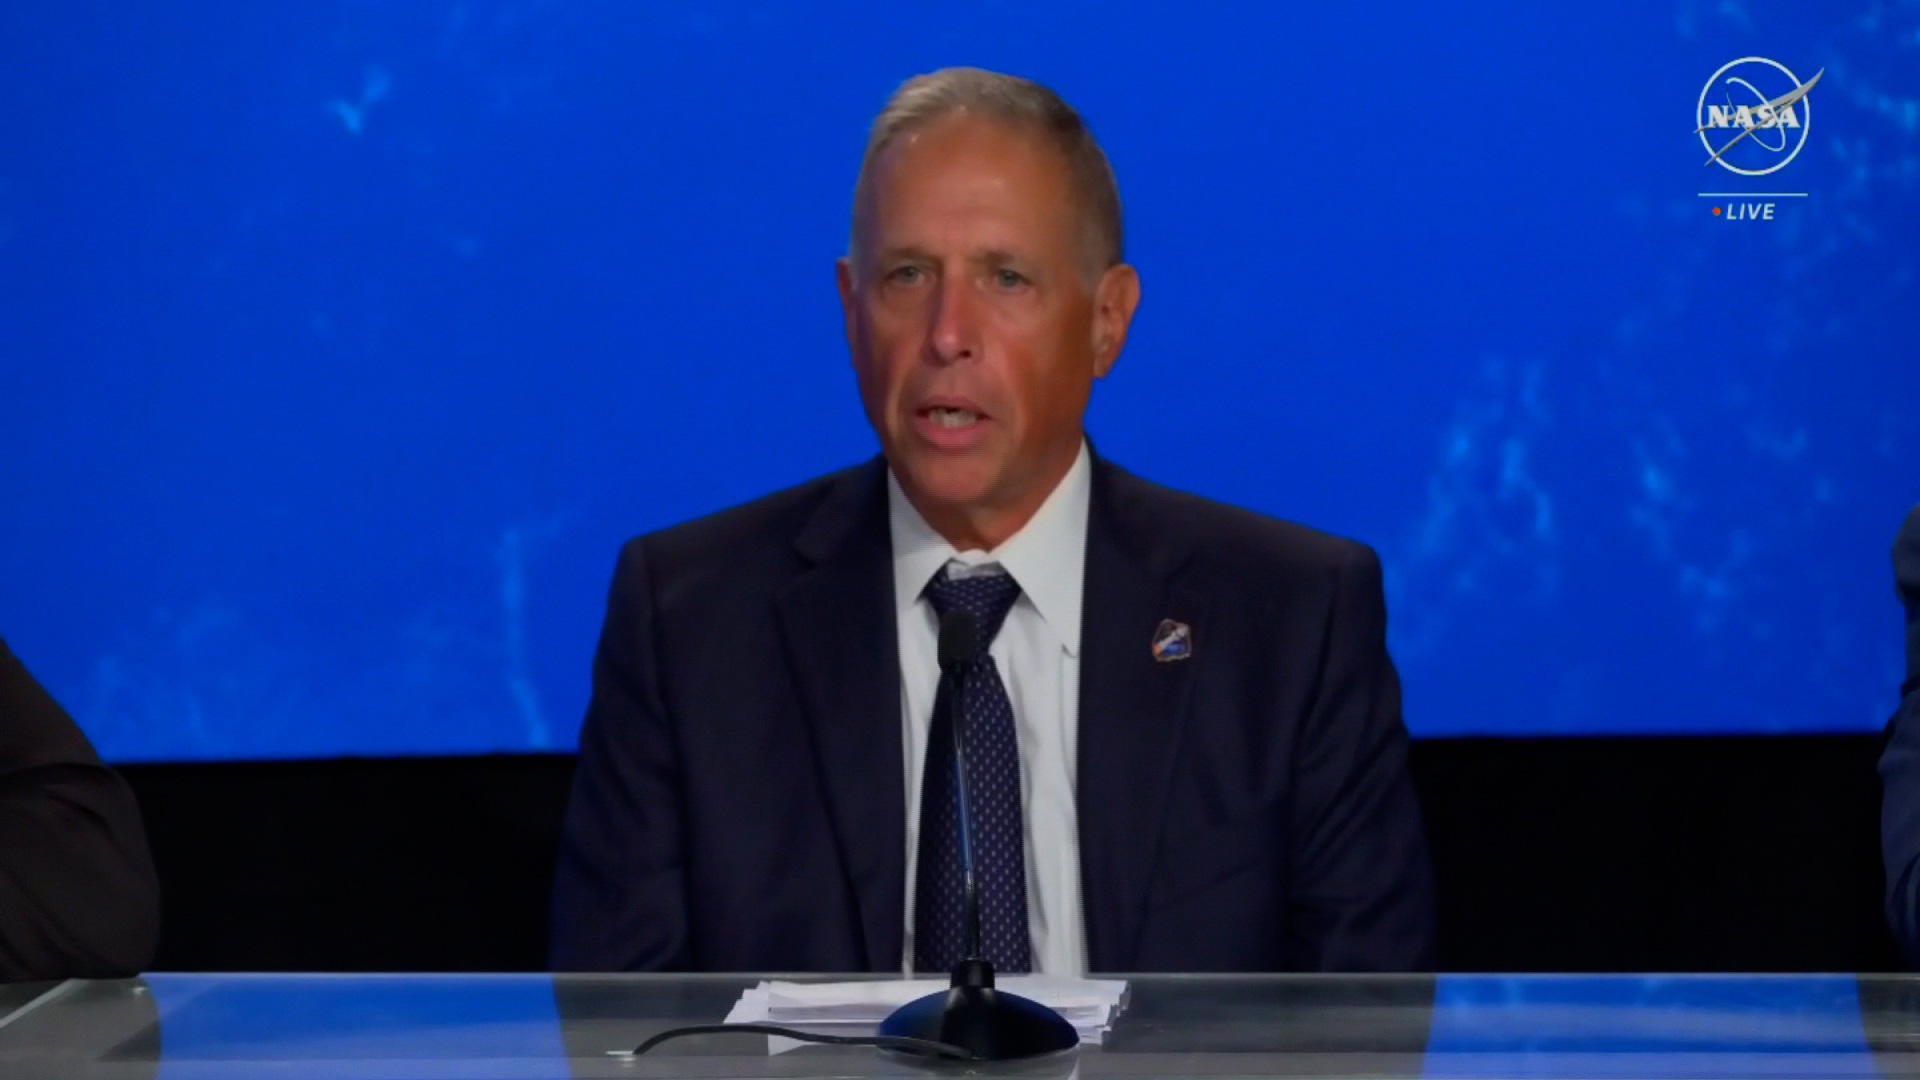 In this screen grab from video, the vice president and program manager of the Commercial Crew Program for Boeing Mark Nappi speaks at a press conference in Cape Canaveral, Florida, on Wednesday.